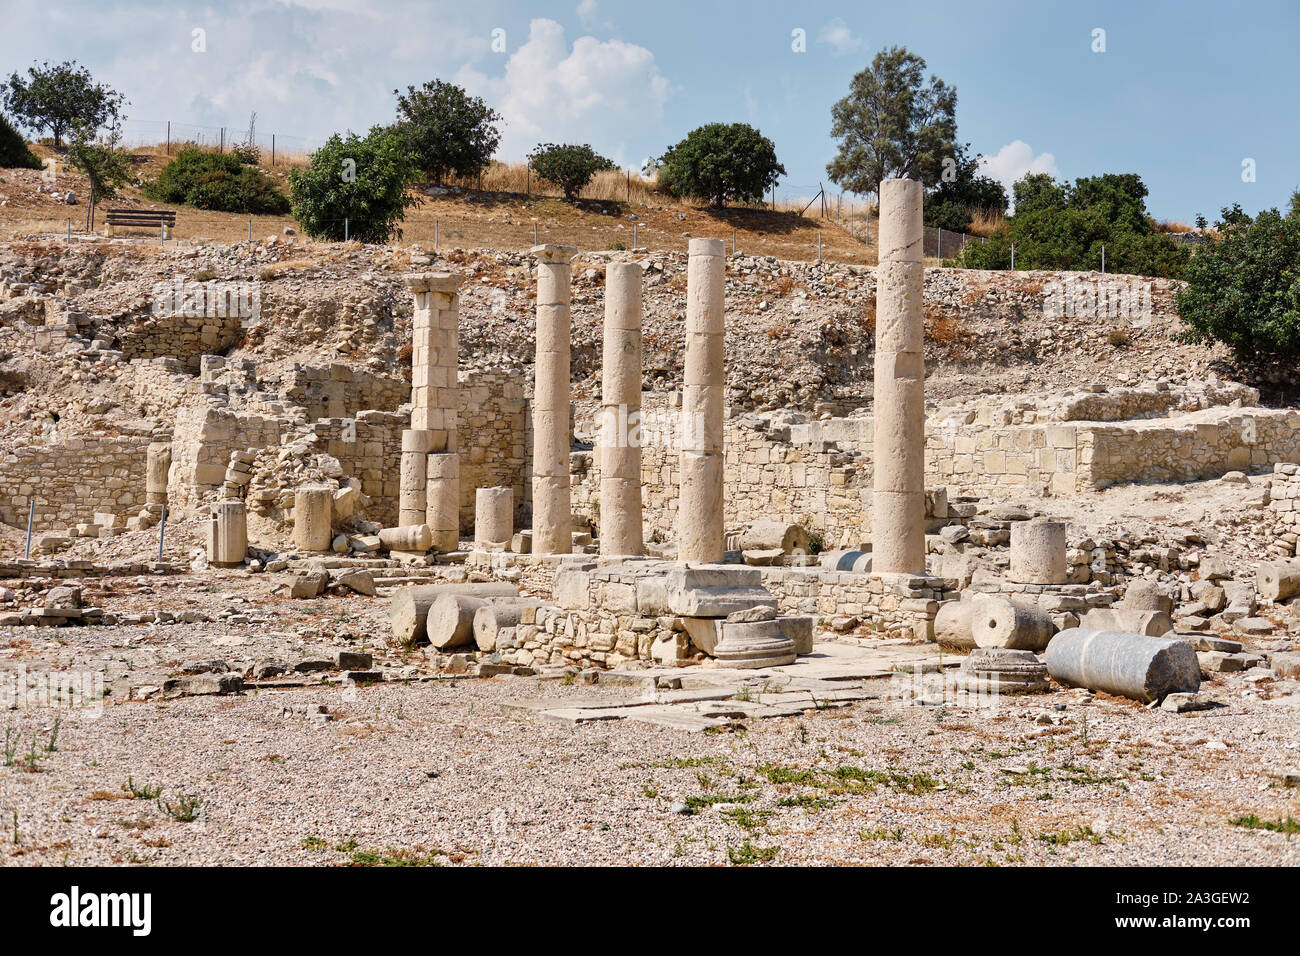 Archaic ruins of the Sanctuary of Apollo Hylates located at the beach of the azure mediterranean sea. Near the Ancient Greek town of Kourion. Limassol Stock Photo